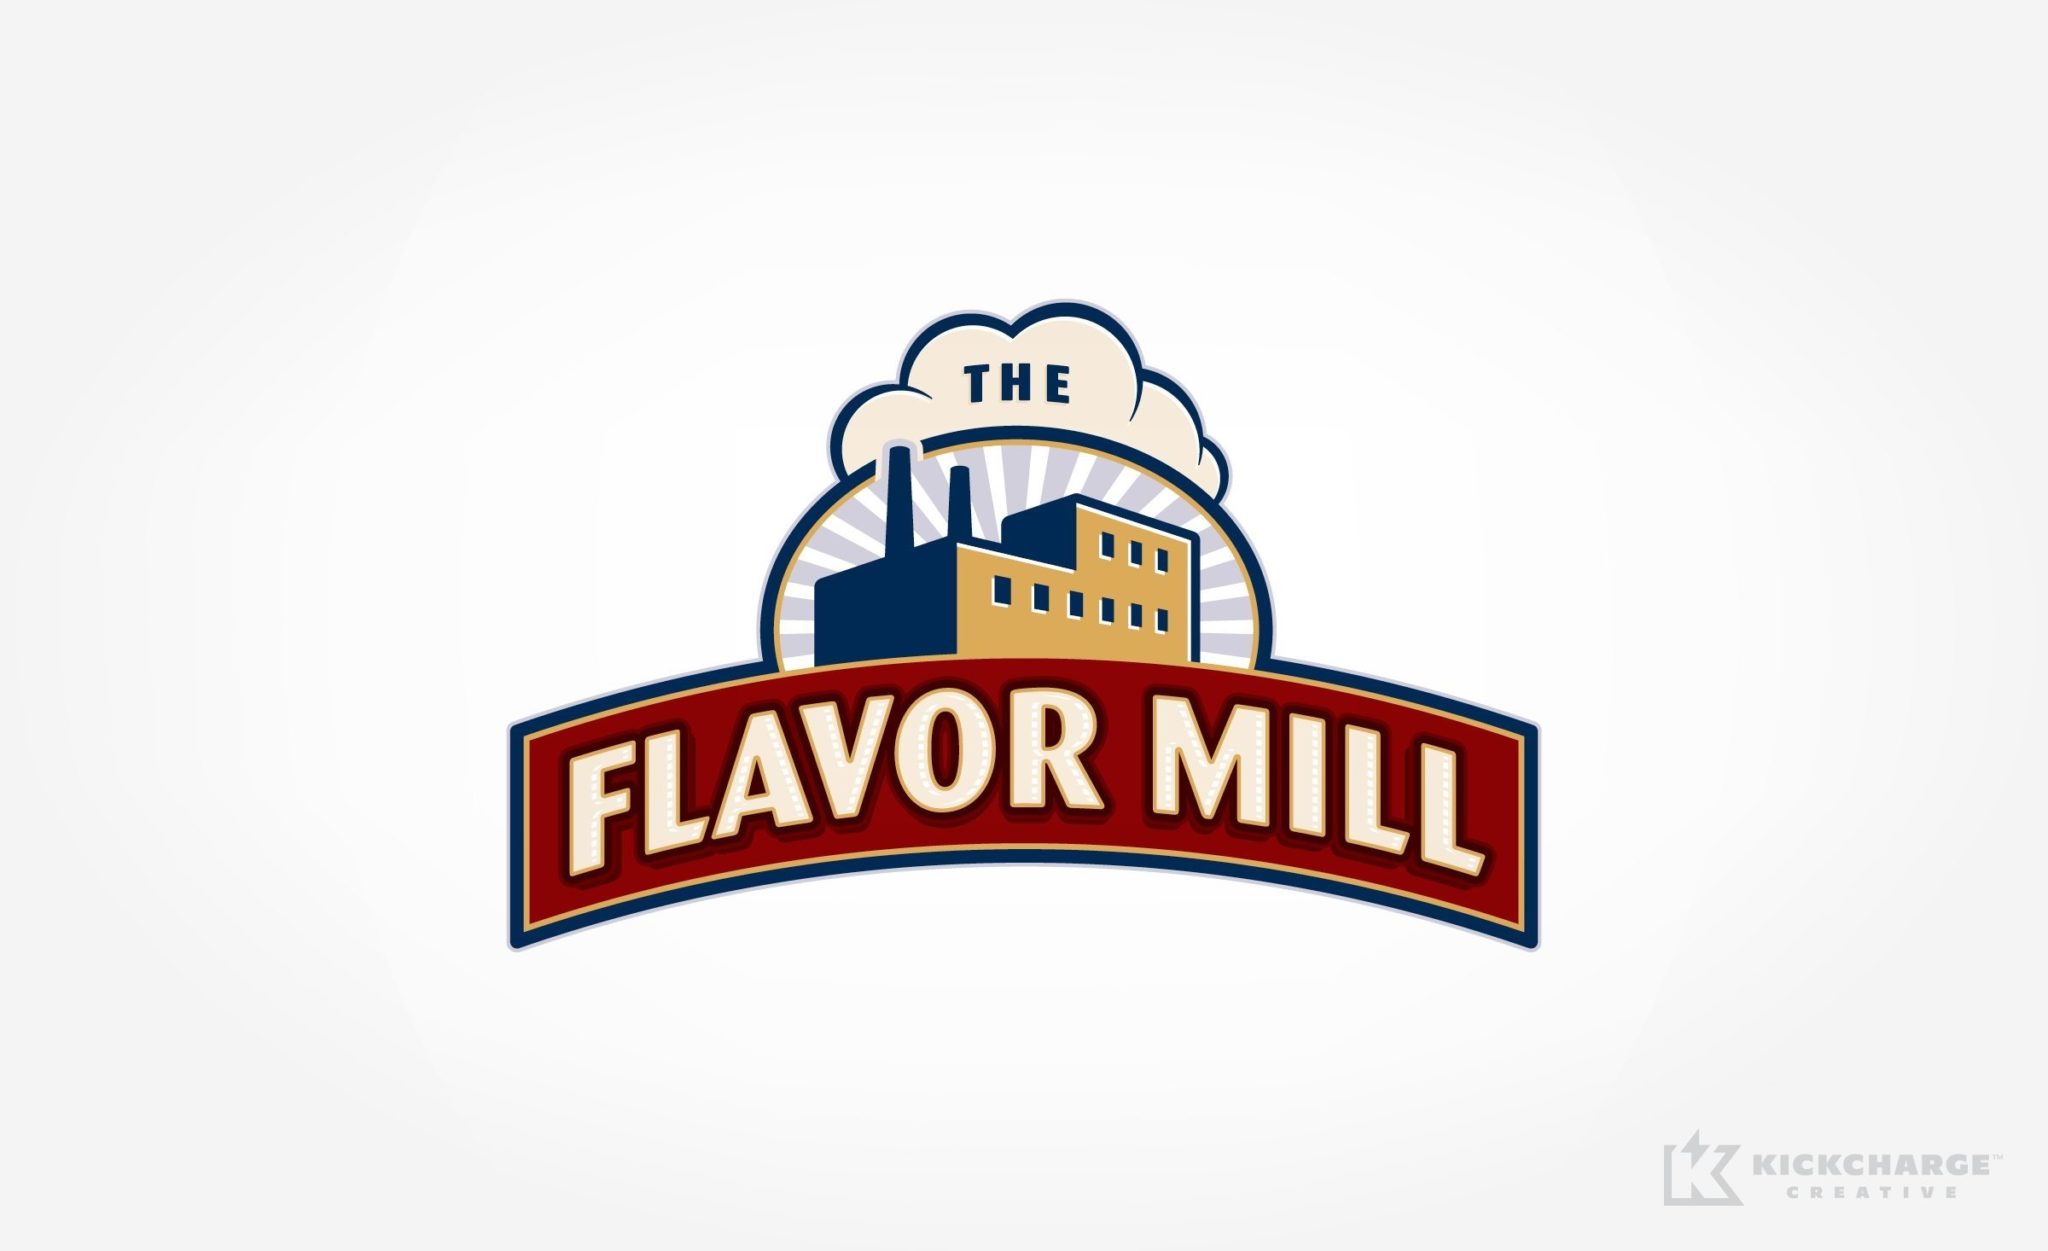 Flavor Mill